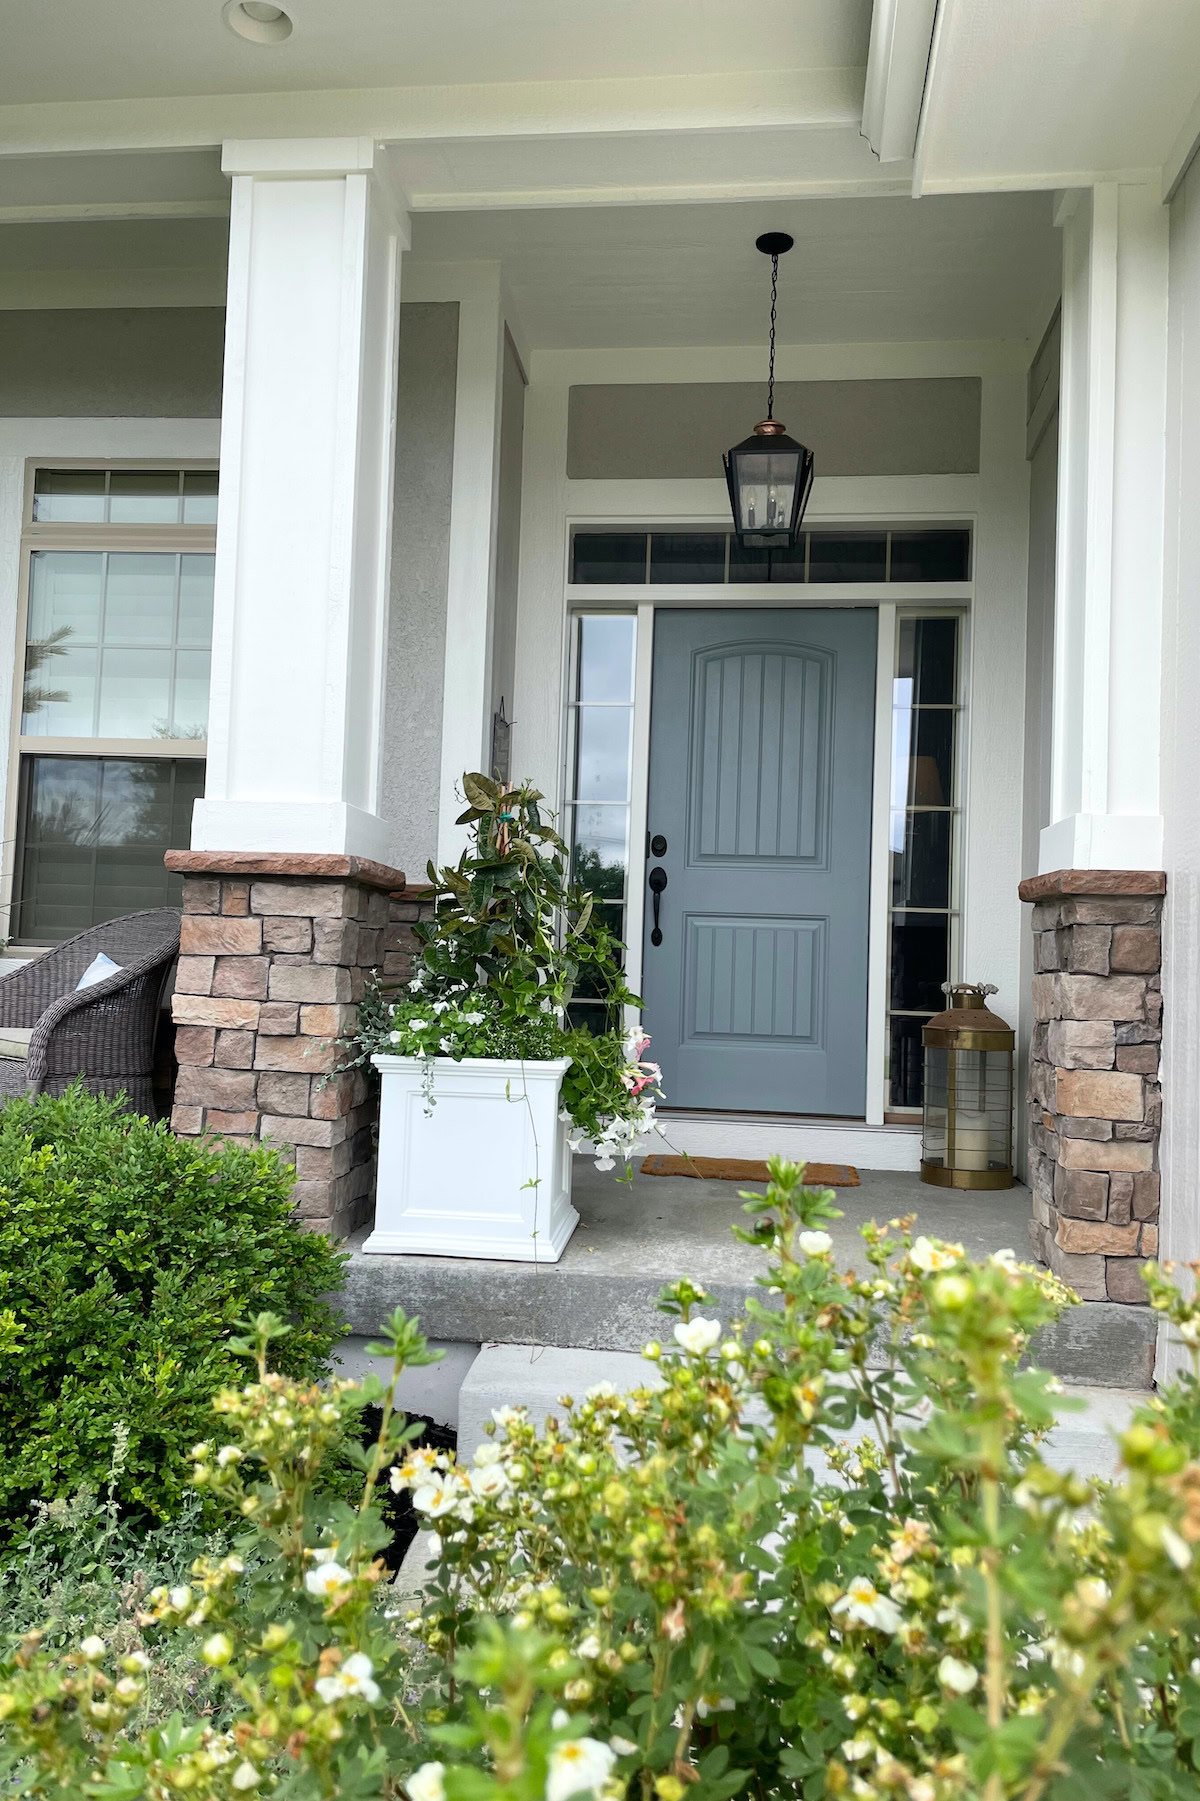 A house entrance with a light blue door, flanked by white columns and stone accents. A white planter with greenery sits near the door, painted in Benjamin Moore Brewster Gray, and a hanging lantern light fixture is above it. Bushes in the foreground.